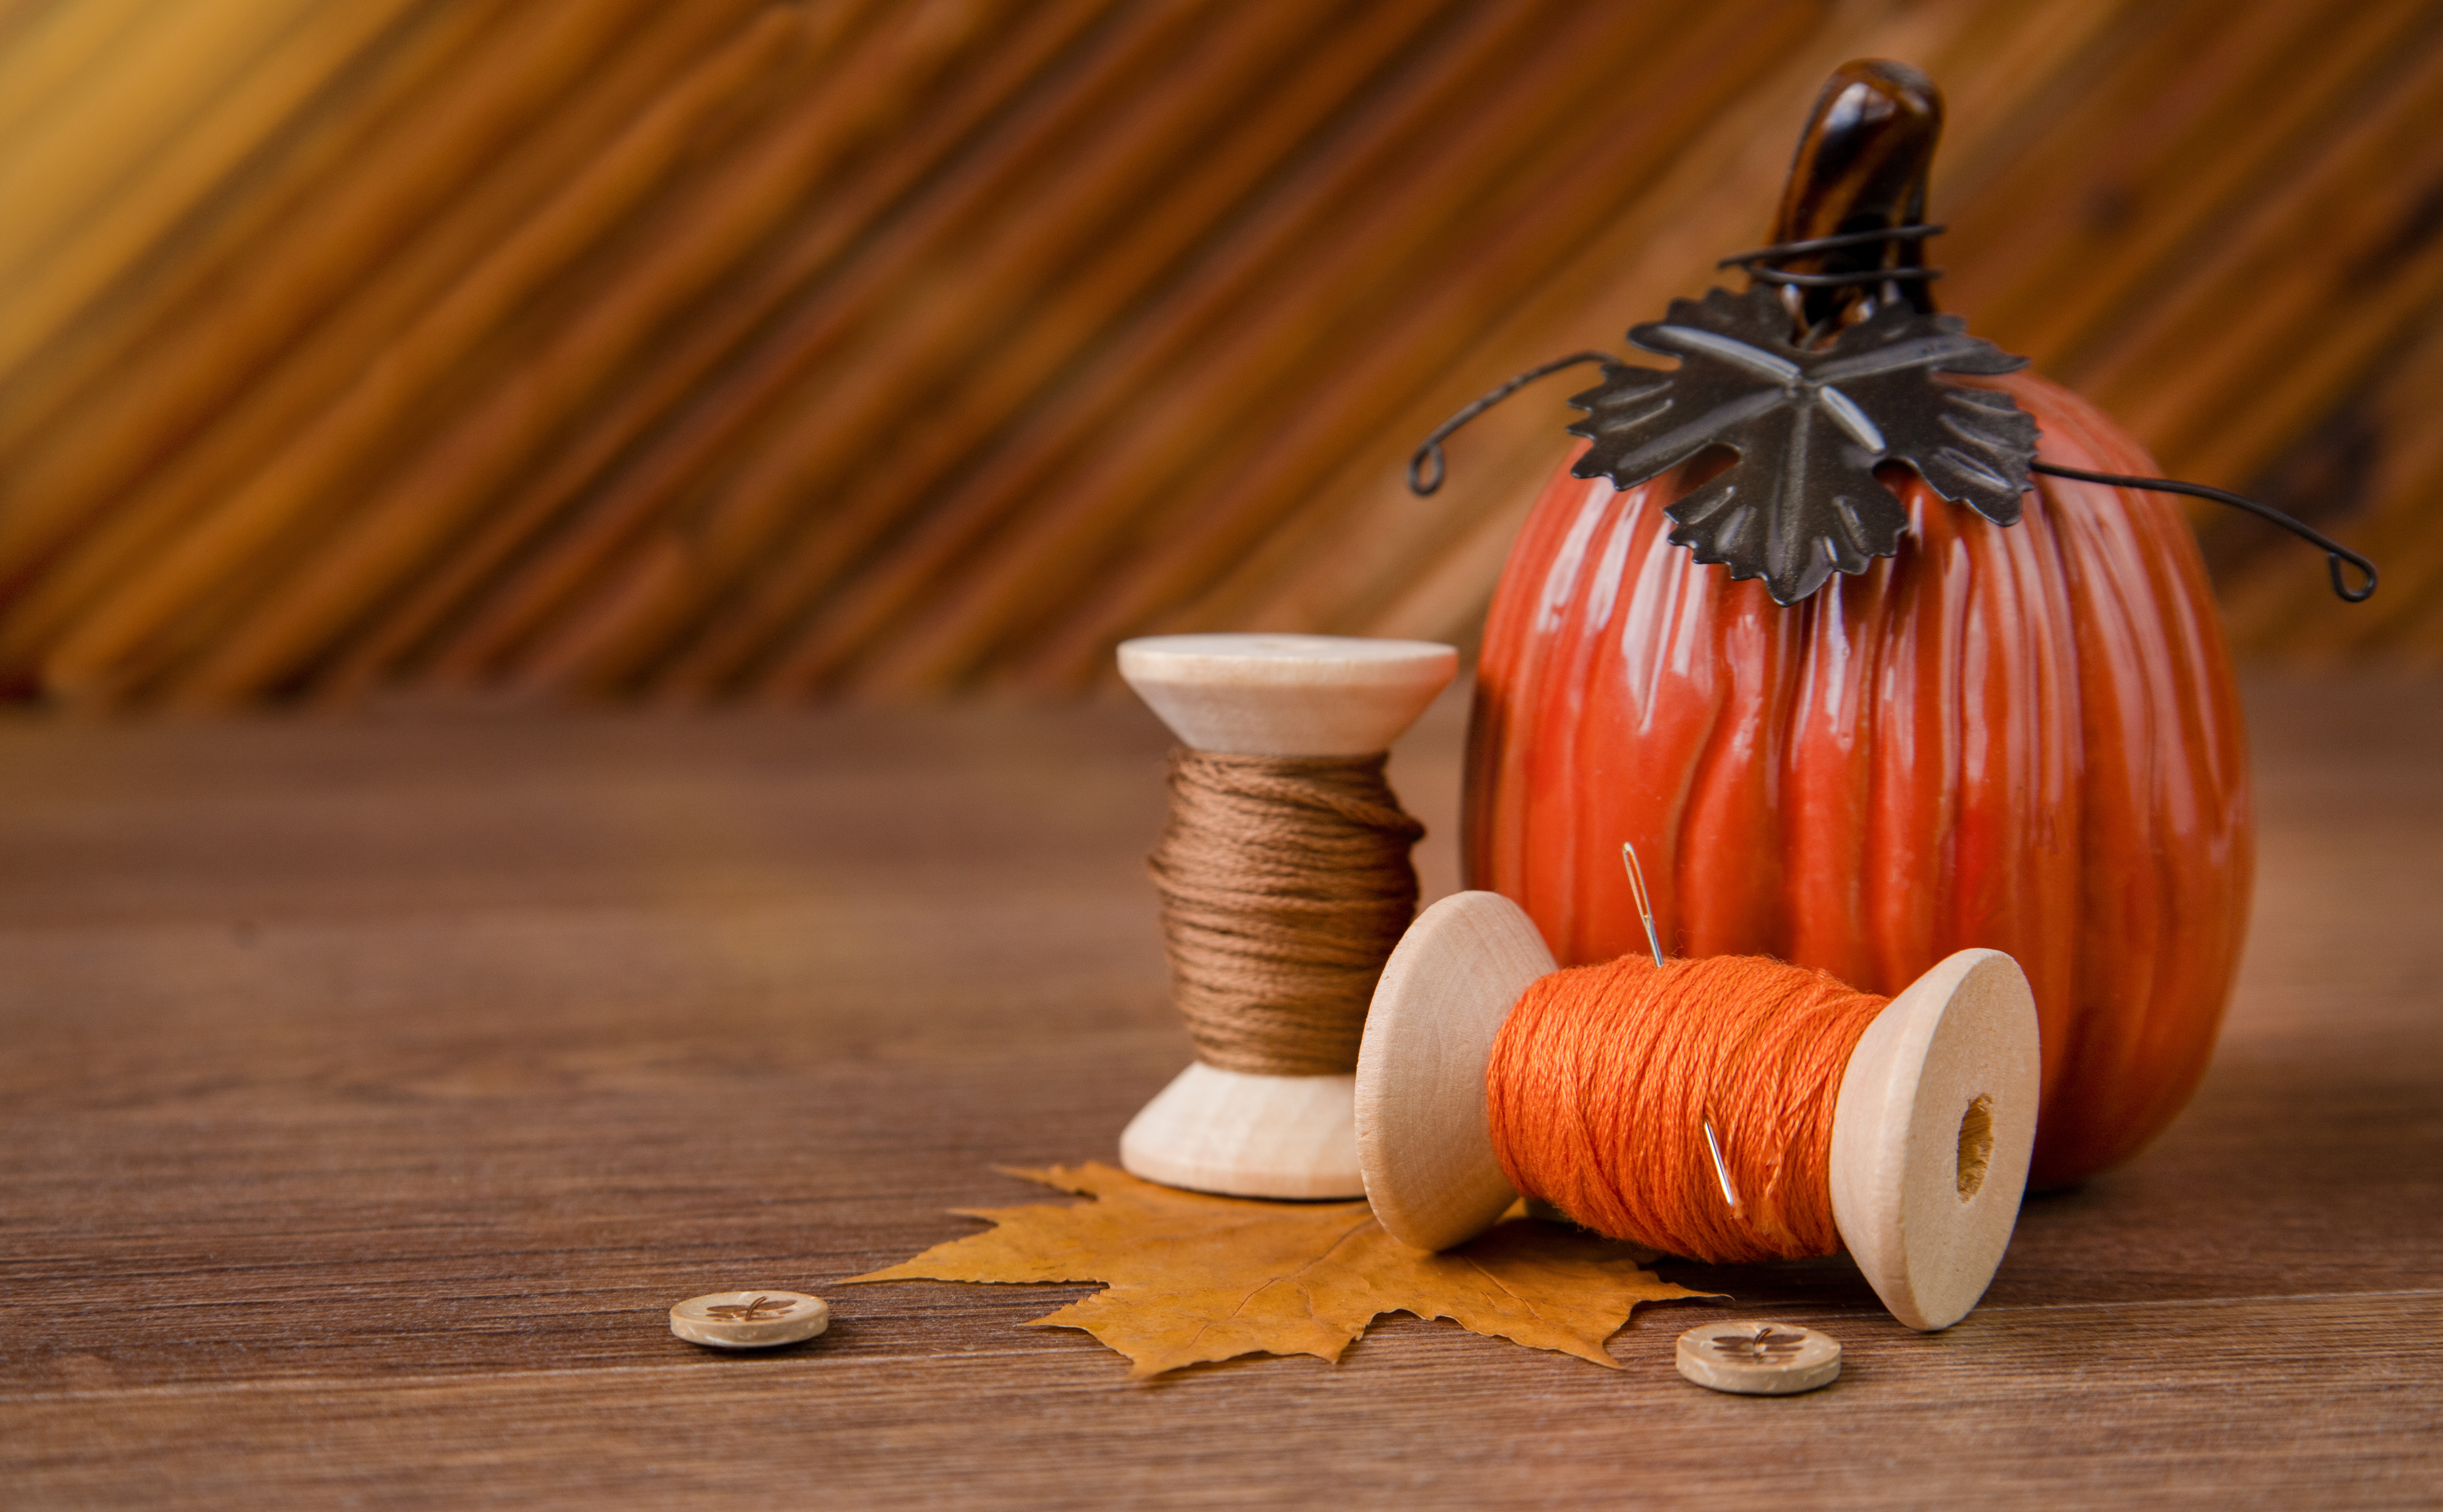 An aesthetic arrangement of a ceramic pumpkin with wooden spools of fall colored thread.